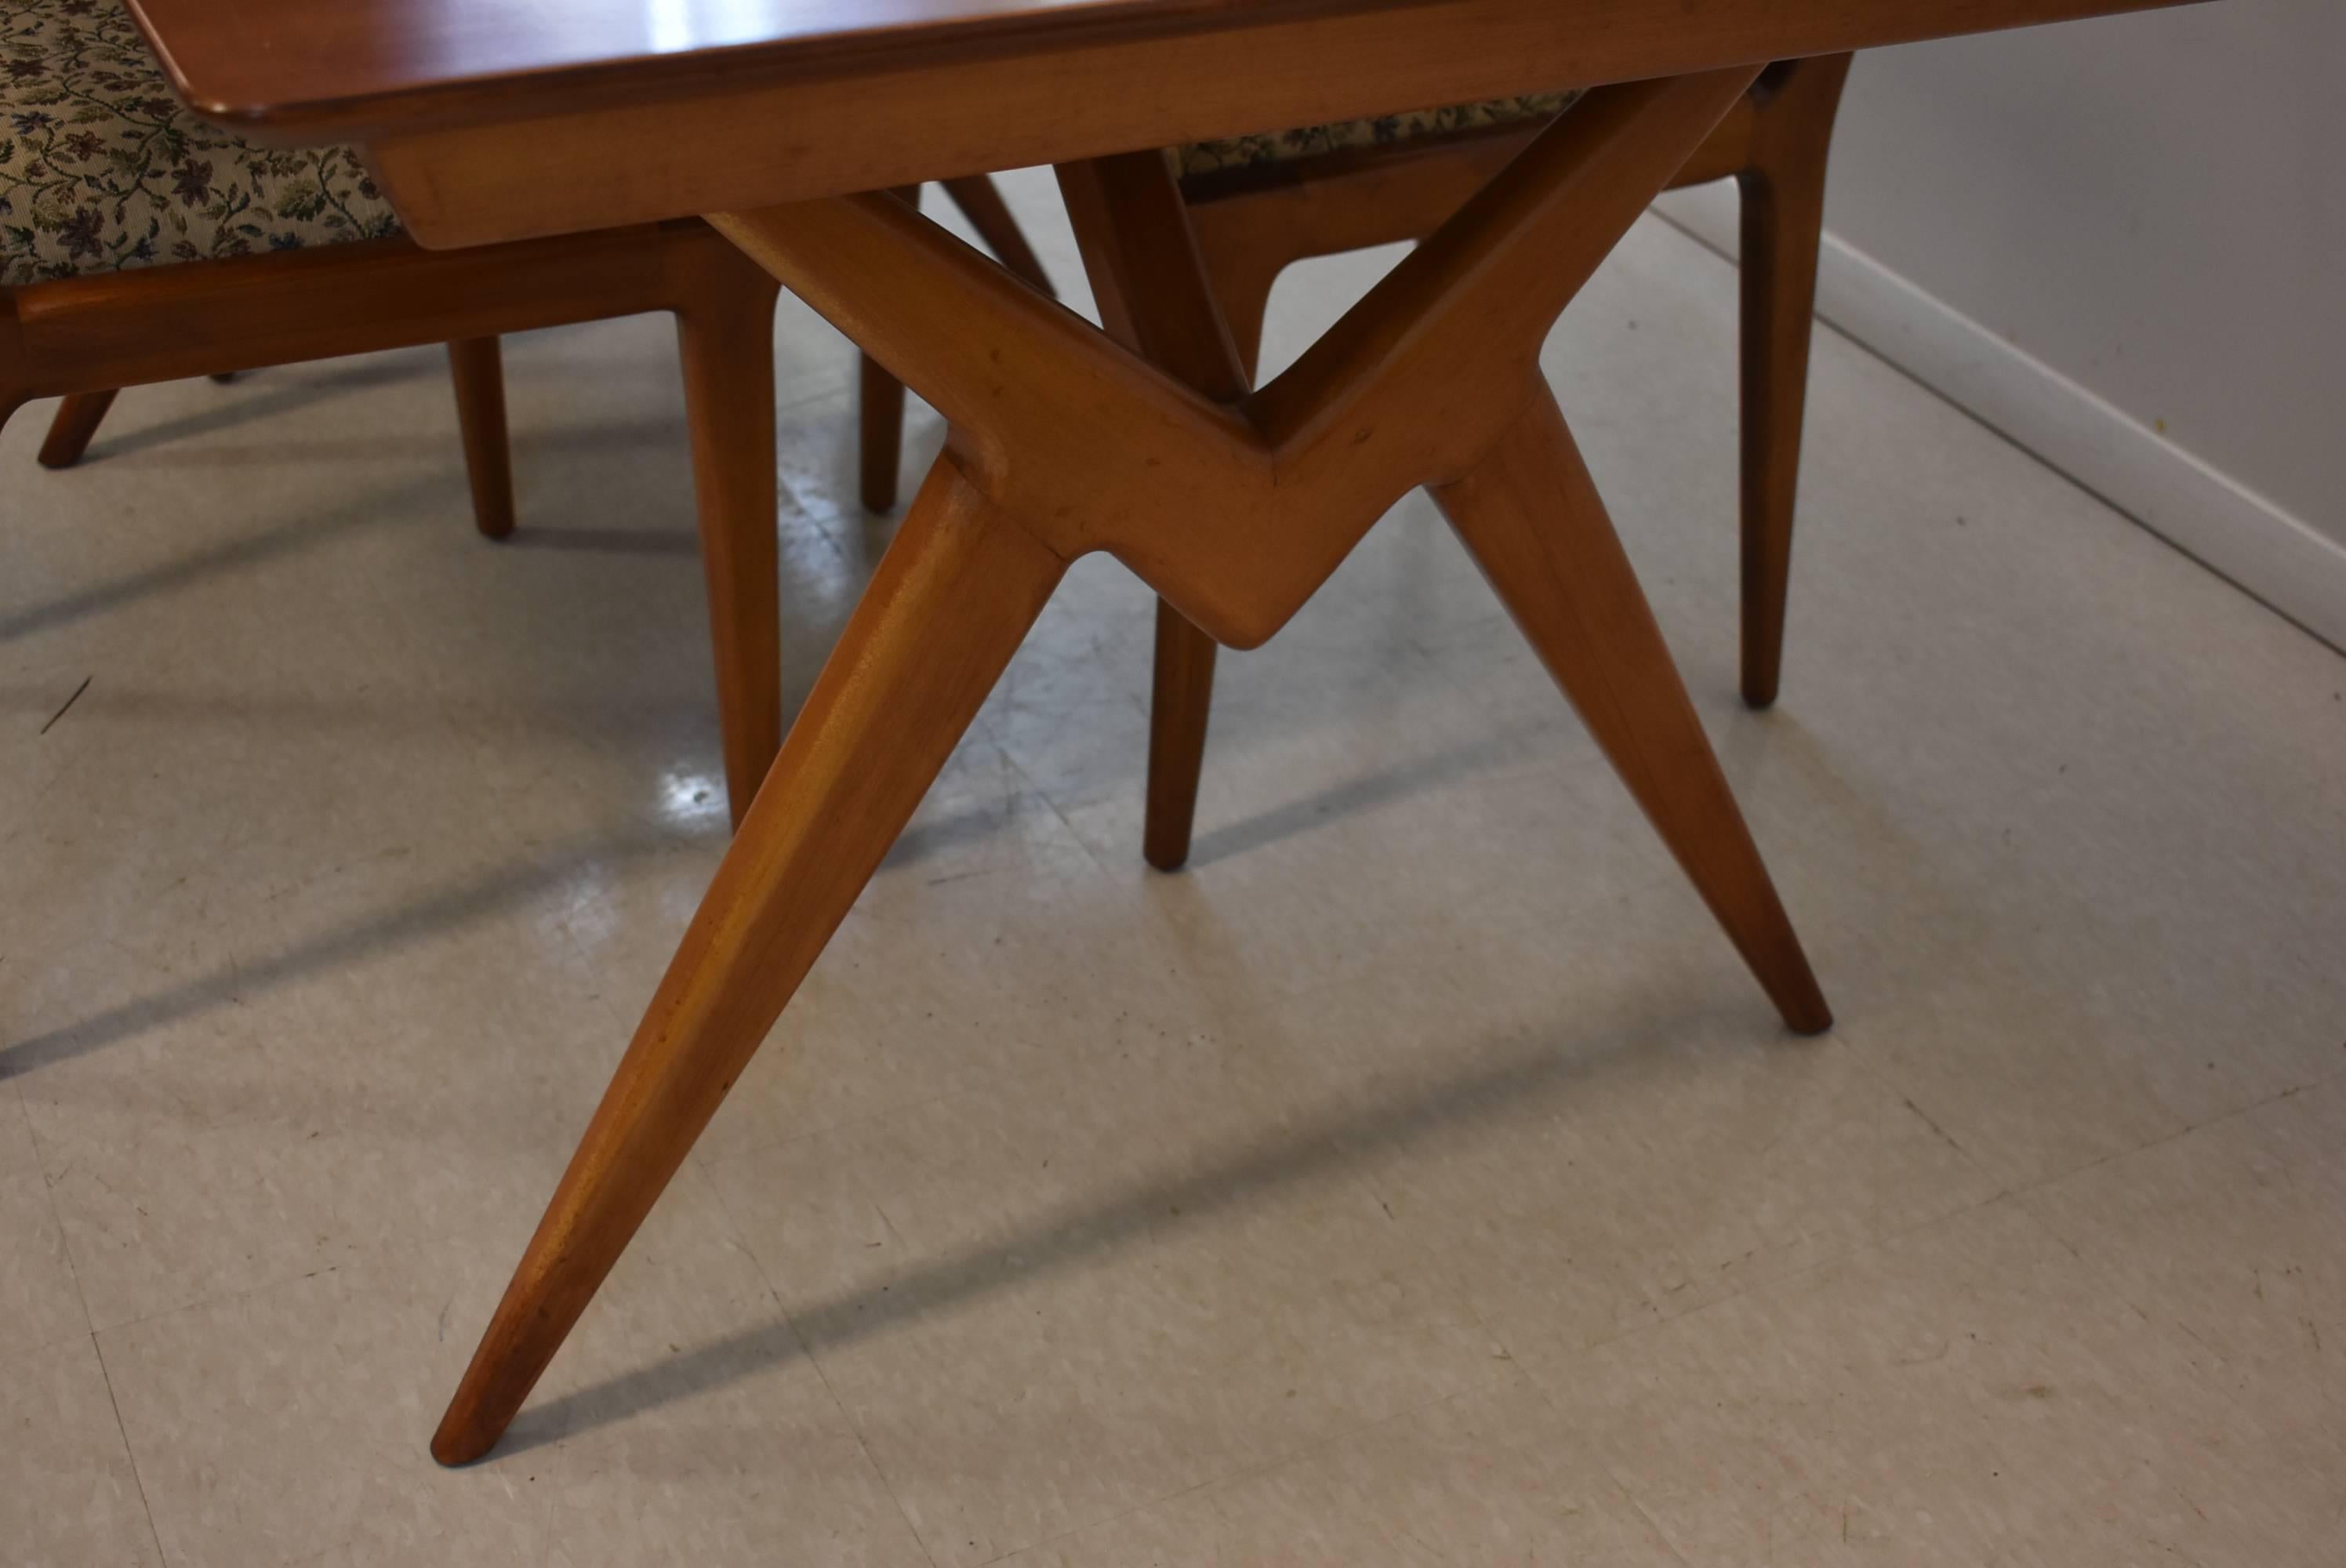 American Mid-Century Modern Dining Room Table and Four Chairs, Johnson Furniture Company